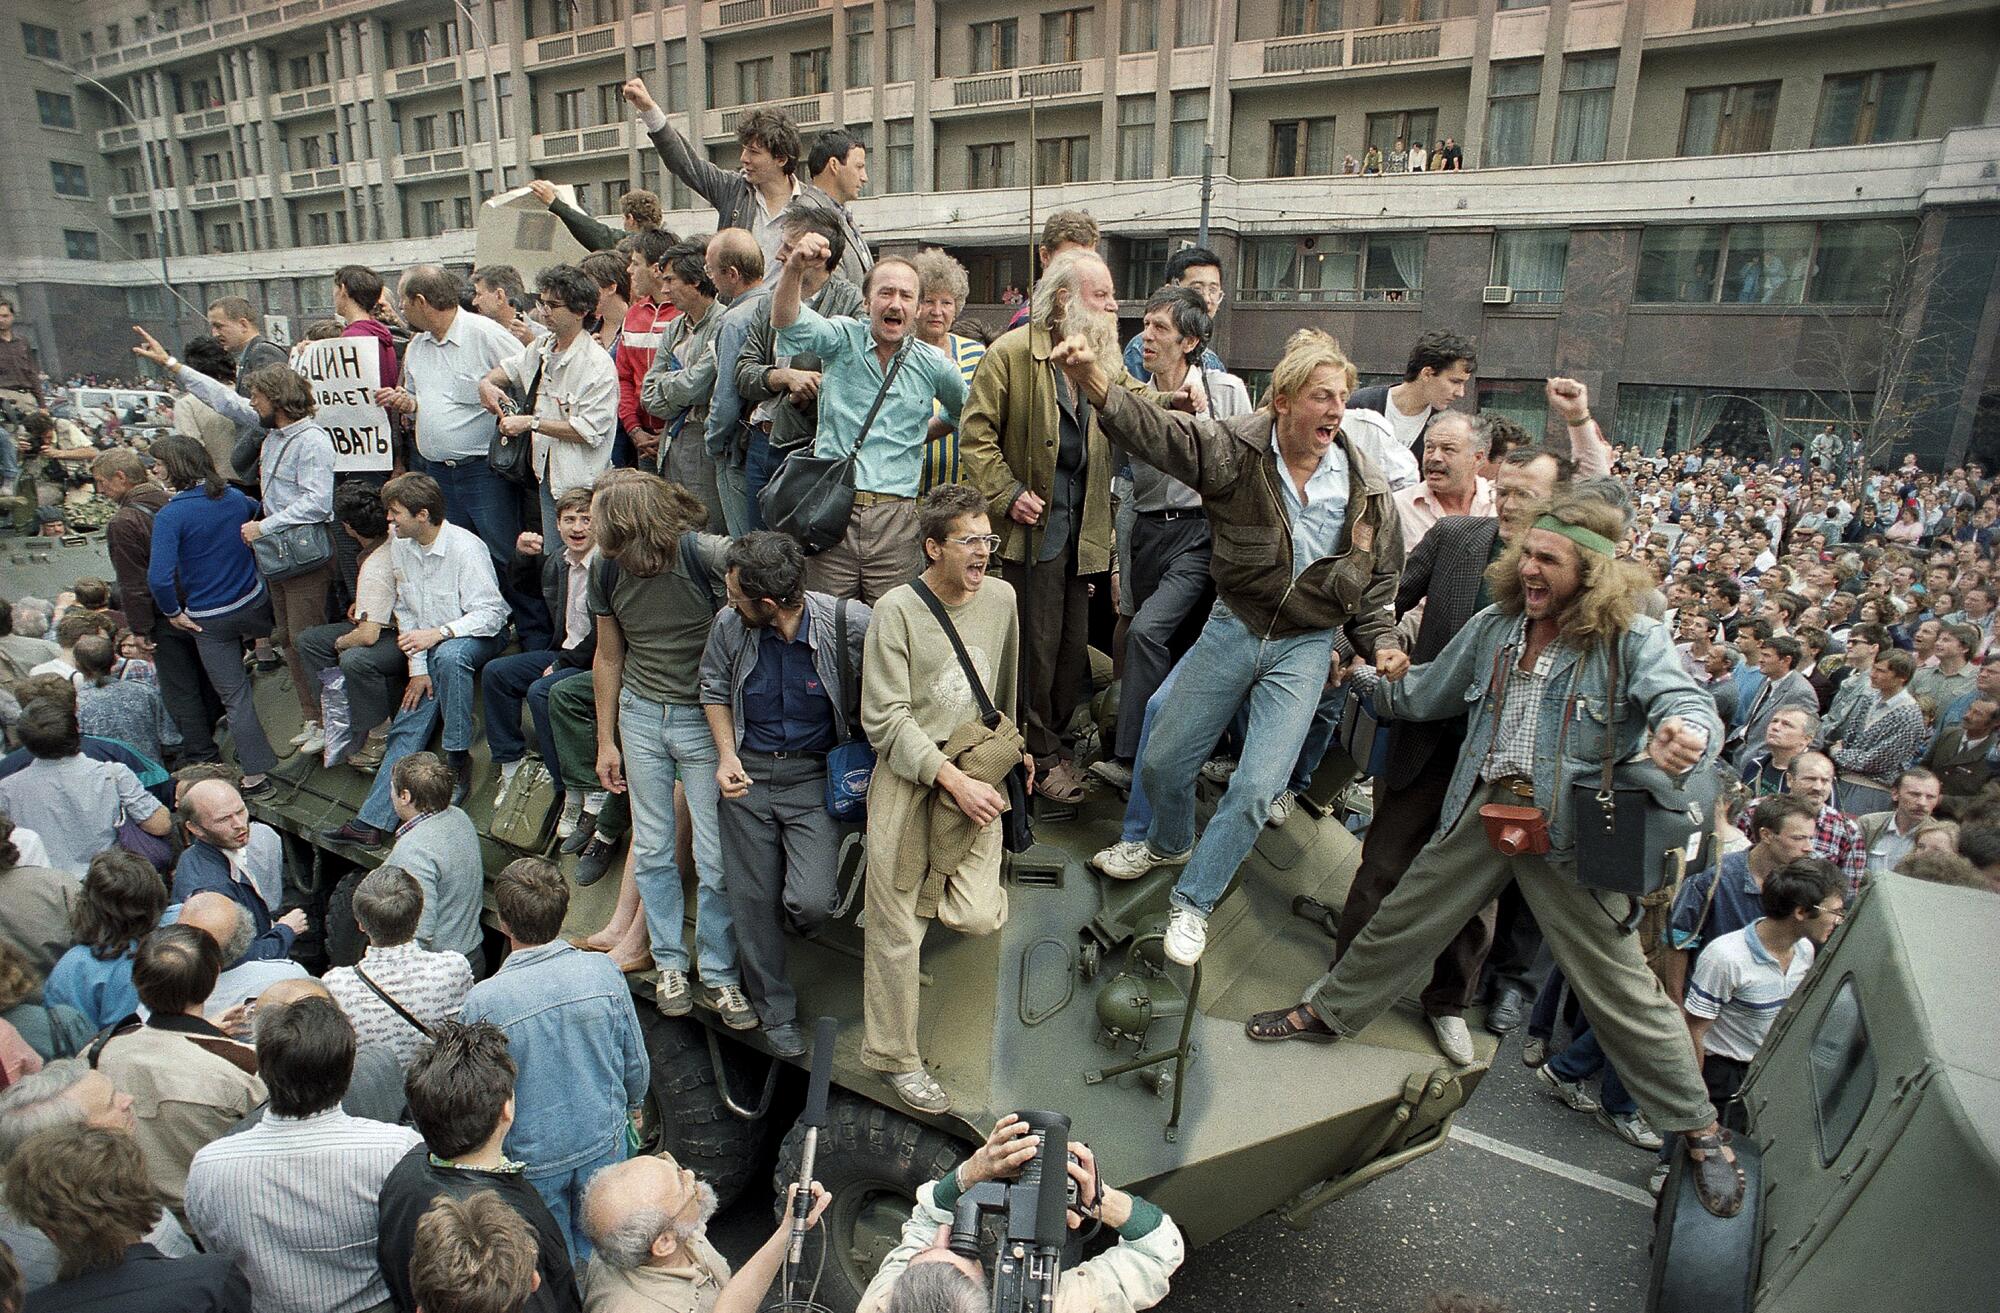 People stand atop a personnel carrier on a street, surrounded by crowds of people in front of a building